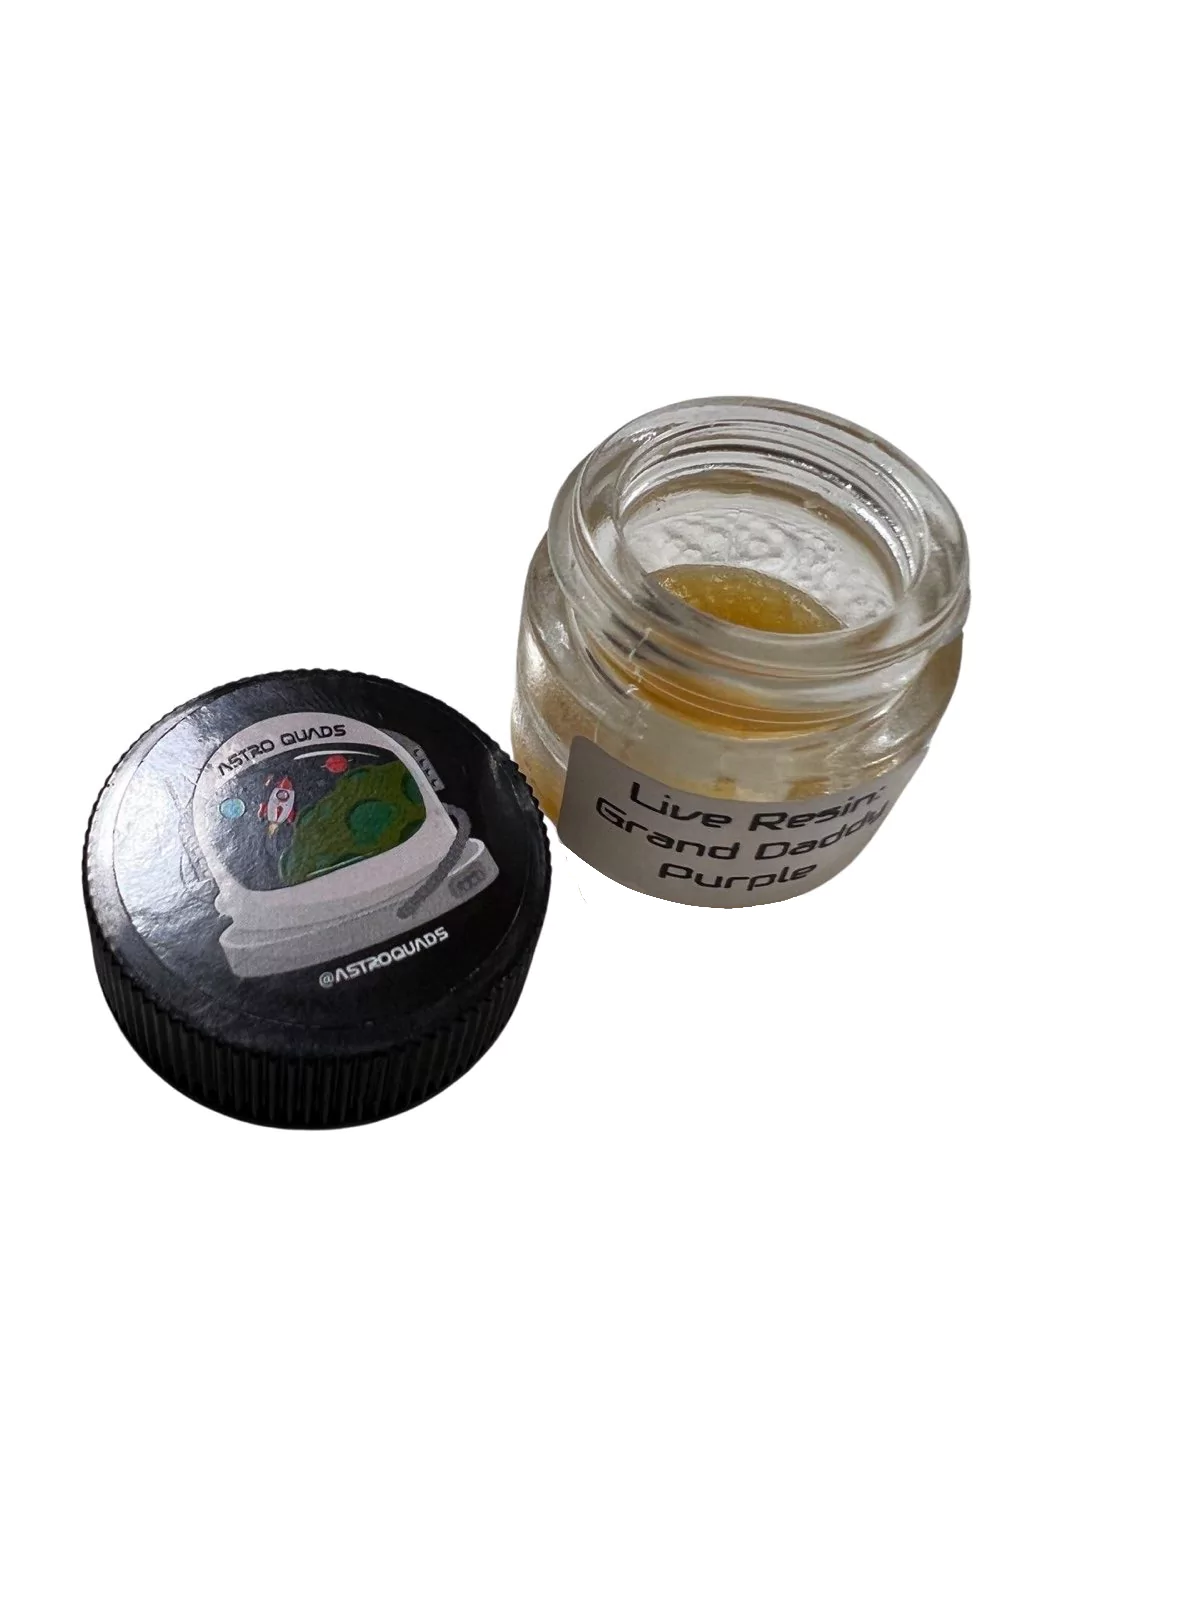 DIVERSITY PACK LISTING FOR ASTRO QUADS LIVE RESIN GRAMMERS